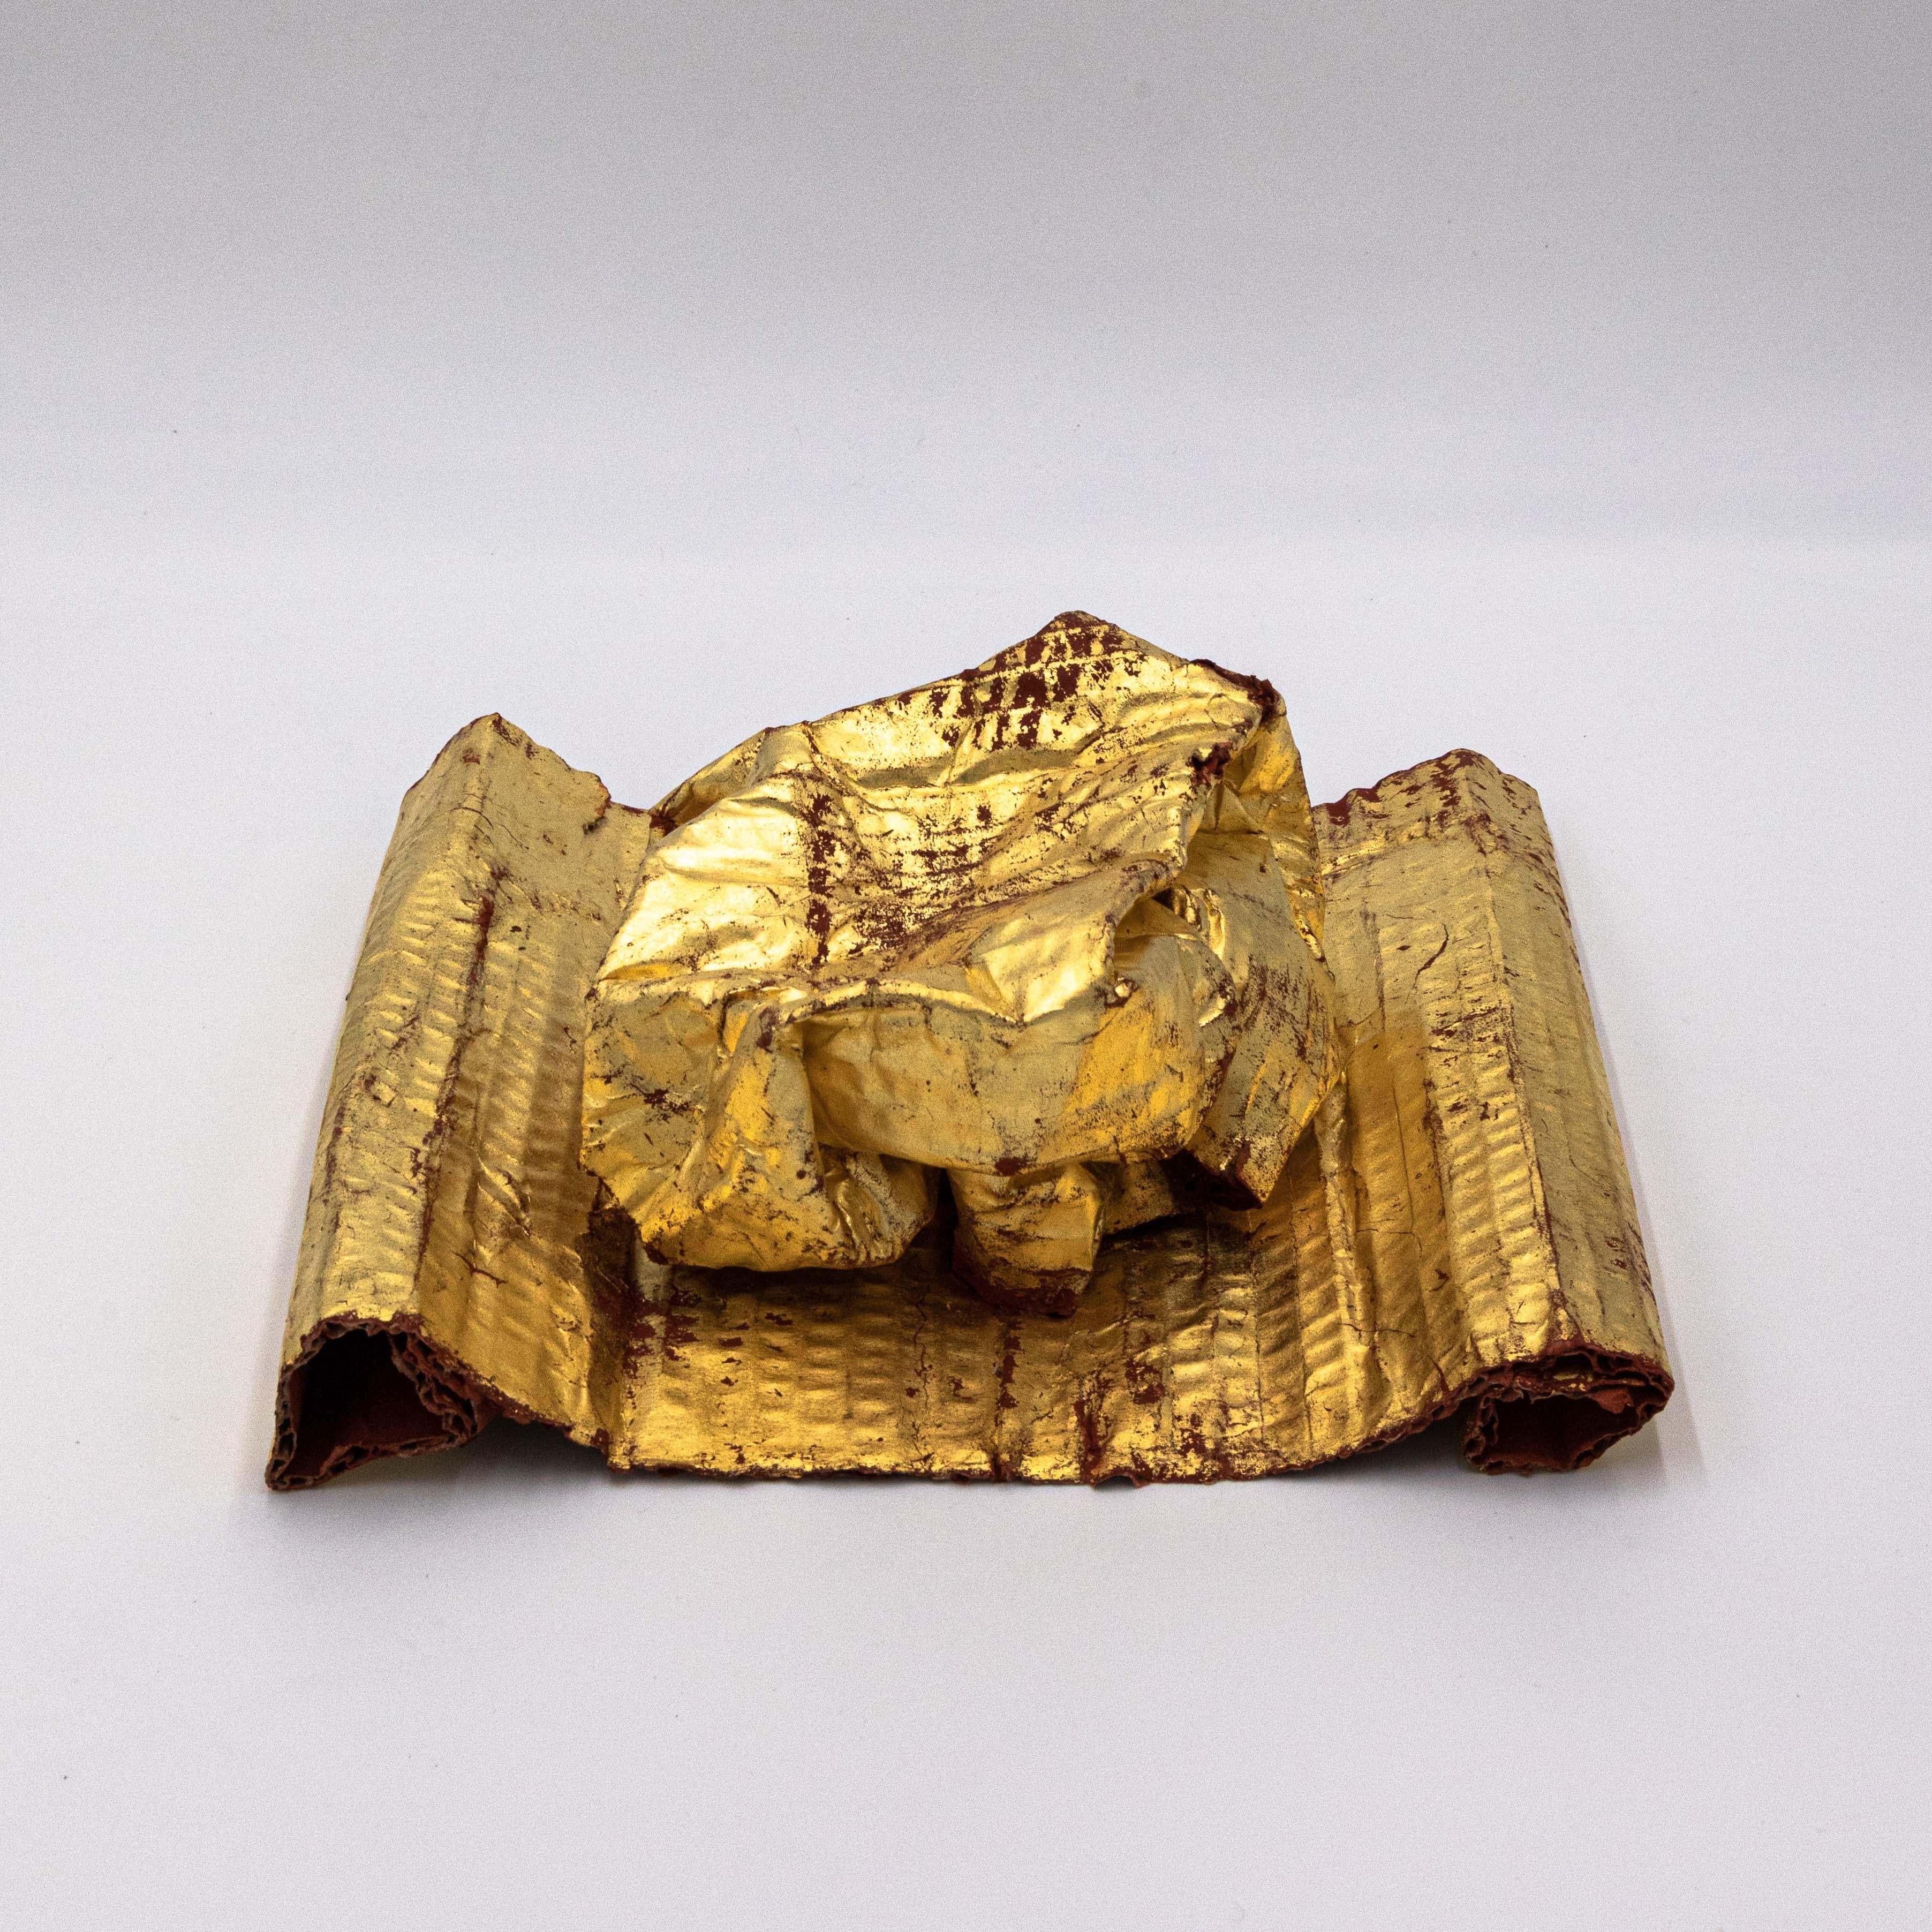 Cardboard, gold leaf, gilder’s bole

This work was created for an exhibit as part of the artistic unit SHIKŌ, a collaborative effort between sculptors Kanji Hasegawa, Isaji Yugo, and Kojun.

The pieces transform everyday items into alters, reminding